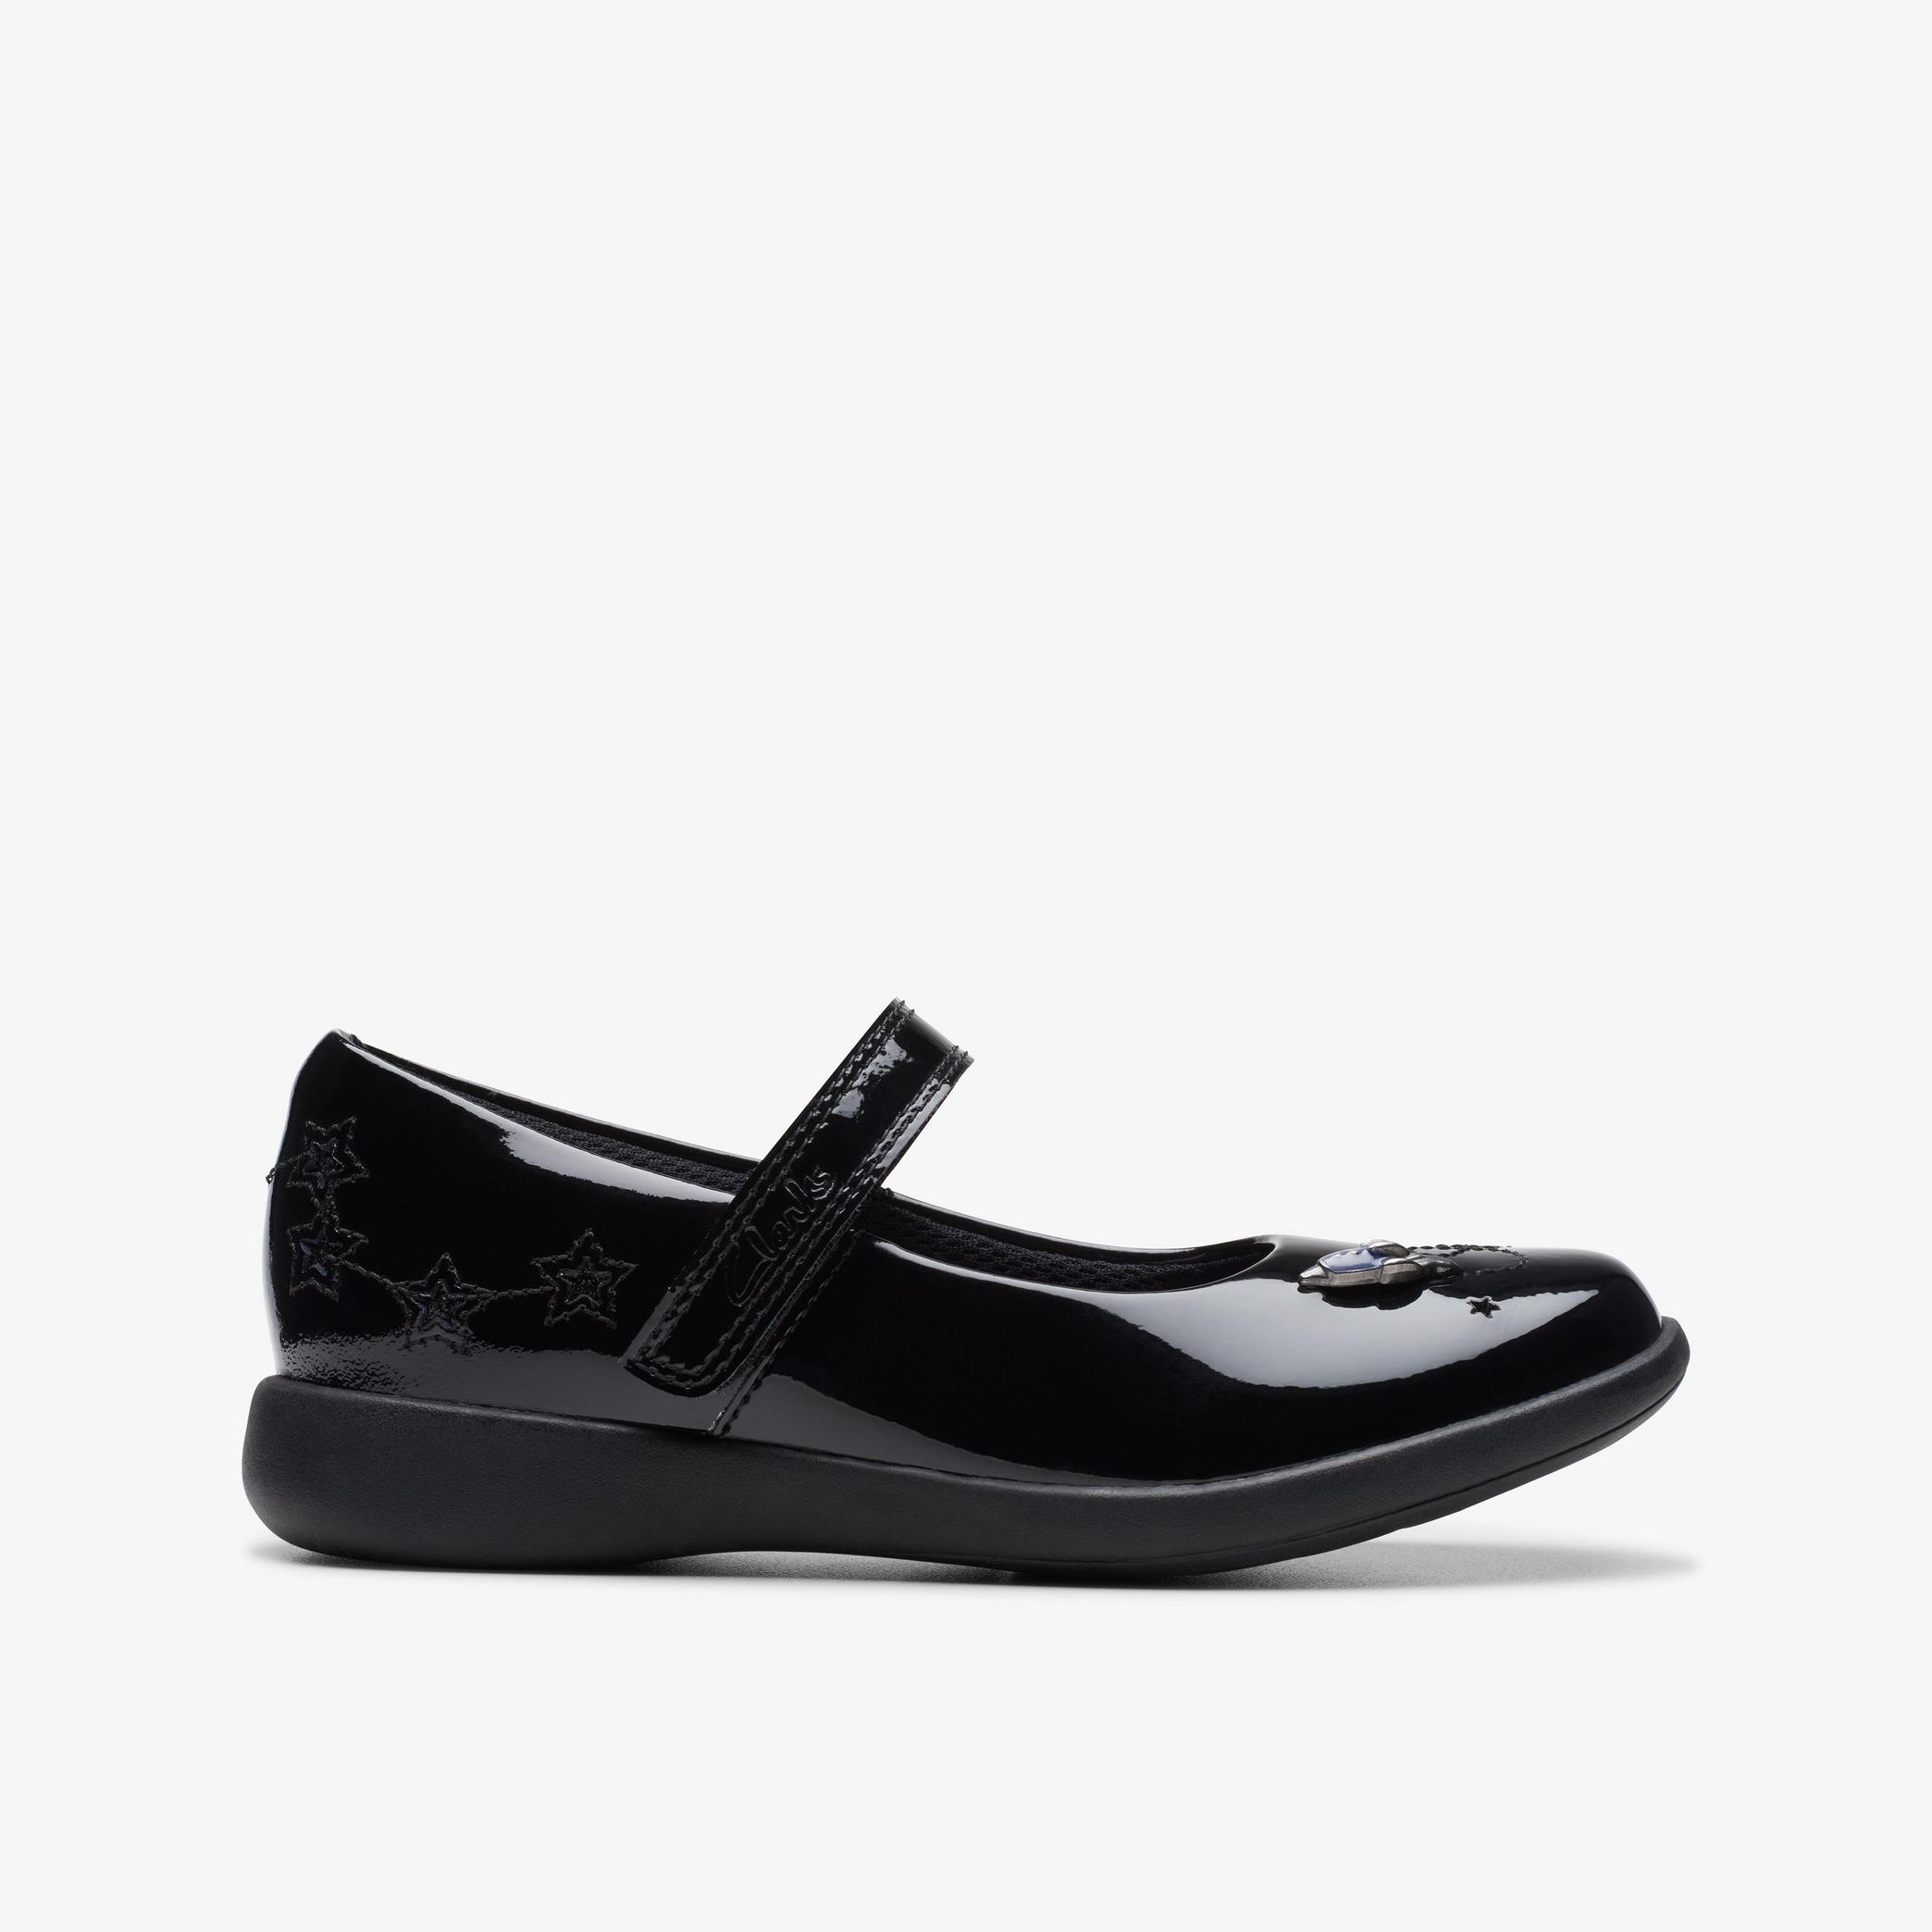 GIRLS Etch Space Kid Black Patent Mary Jane Shoes | Clarks UK